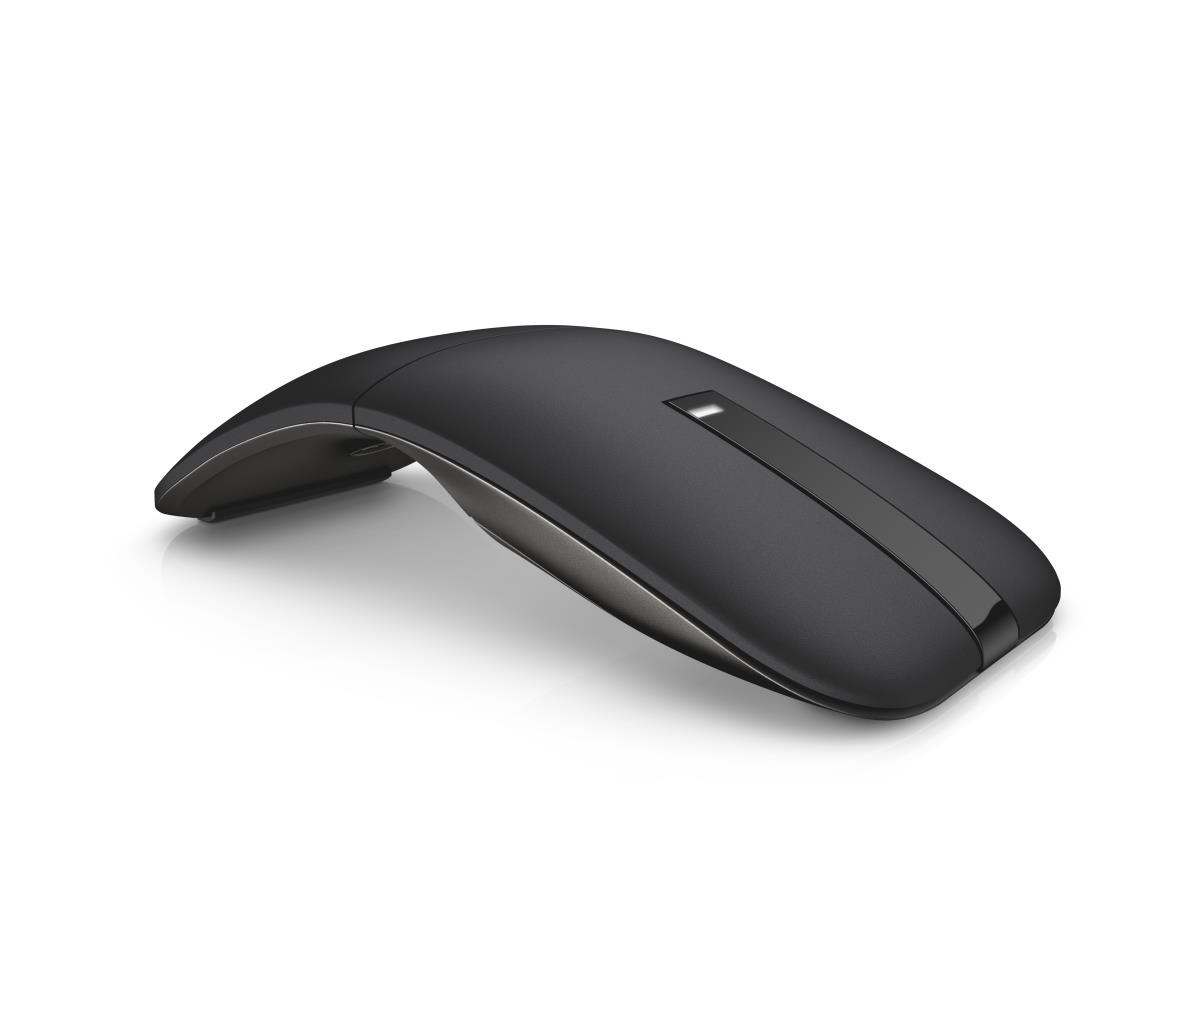 Best Dell Mouses (5 Mices to Enhance your Browsing Experience)